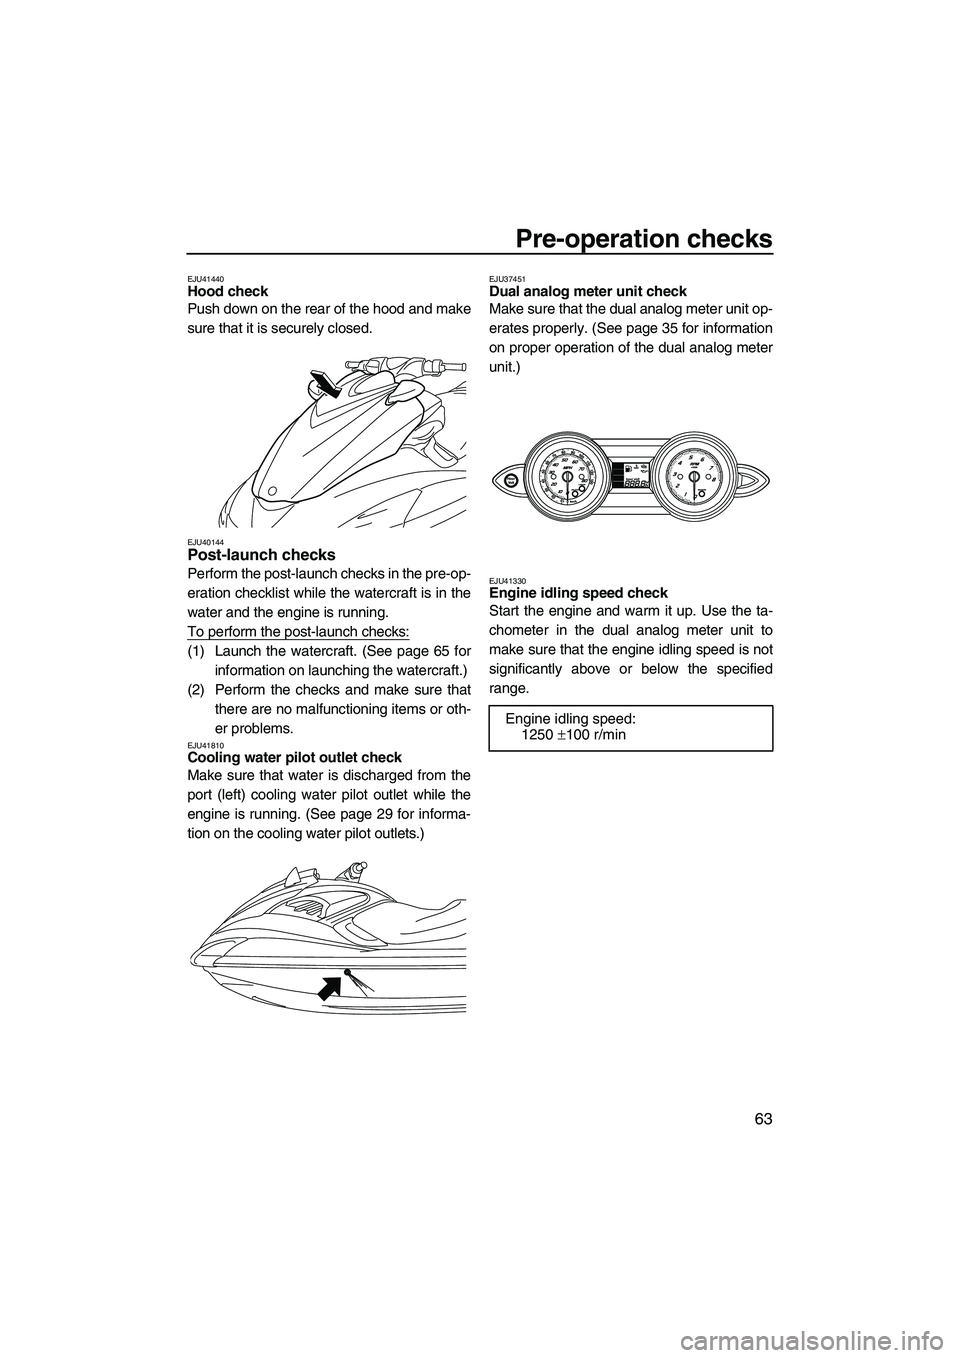 YAMAHA FZR 2012  Owners Manual Pre-operation checks
63
EJU41440Hood check 
Push down on the rear of the hood and make
sure that it is securely closed.
EJU40144Post-launch checks 
Perform the post-launch checks in the pre-op-
eratio